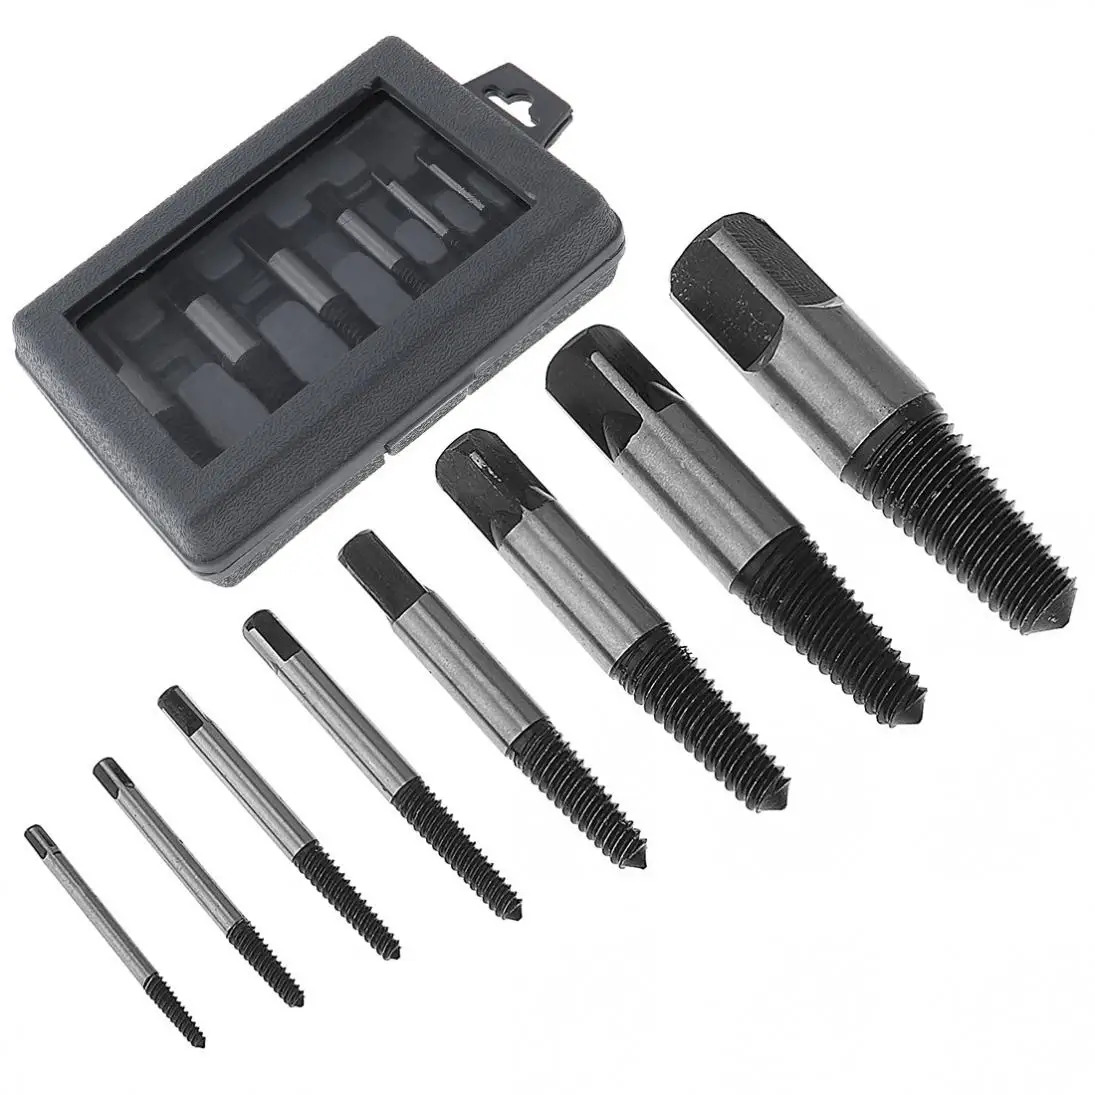 

8pcs Screw Extractor Easy Out Set Drill Bits Guide Broken Damaged Bolt Remover Carbon Steel for Removing Tools